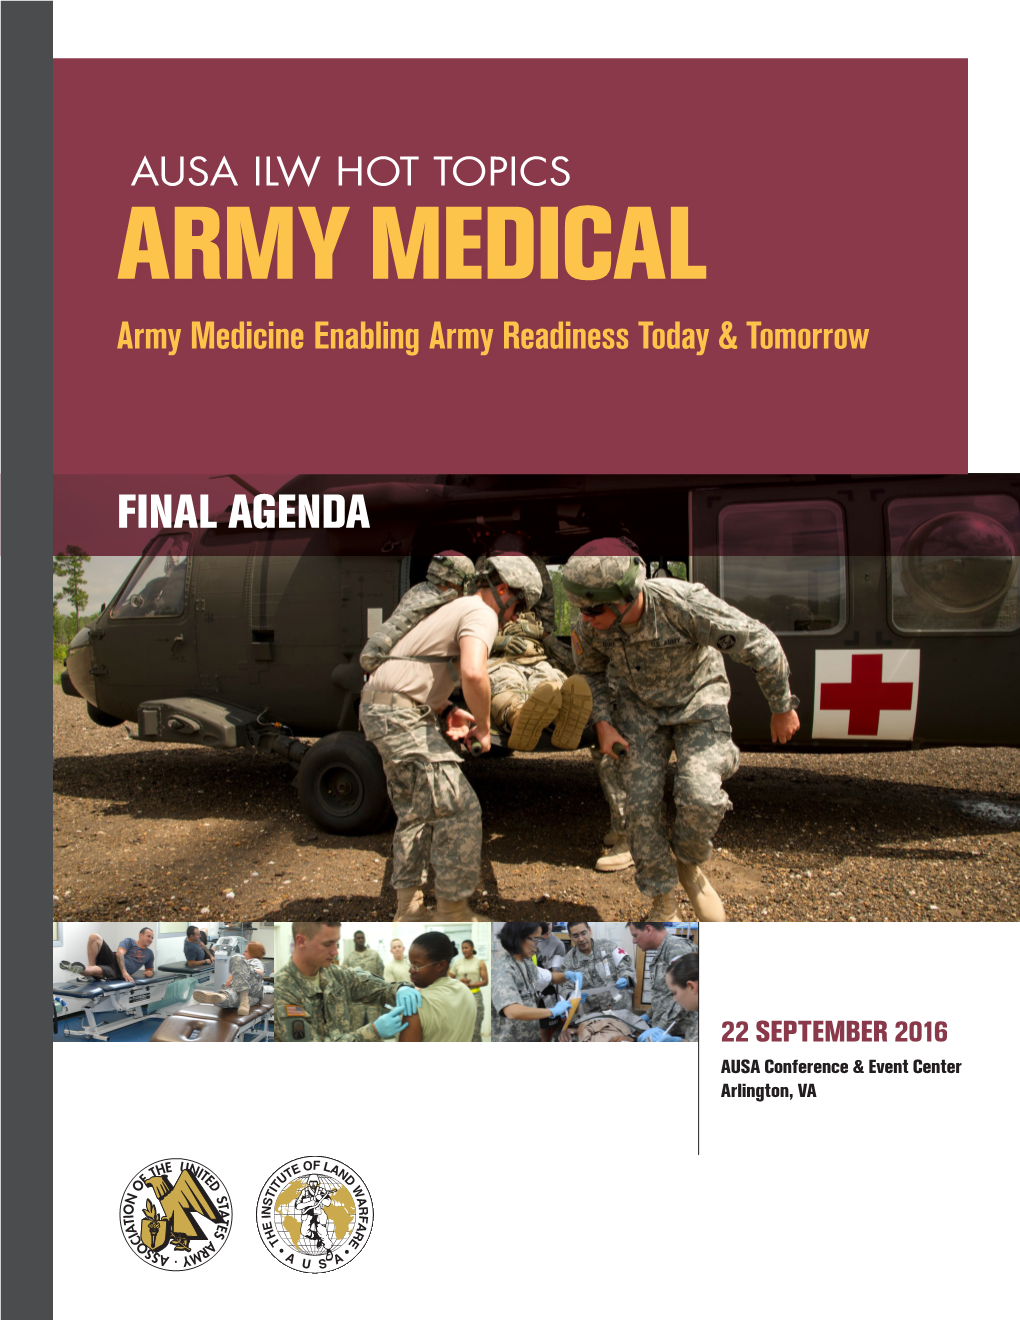 ARMY MEDICAL Army Medicine Enabling Army Readiness Today & Tomorrow